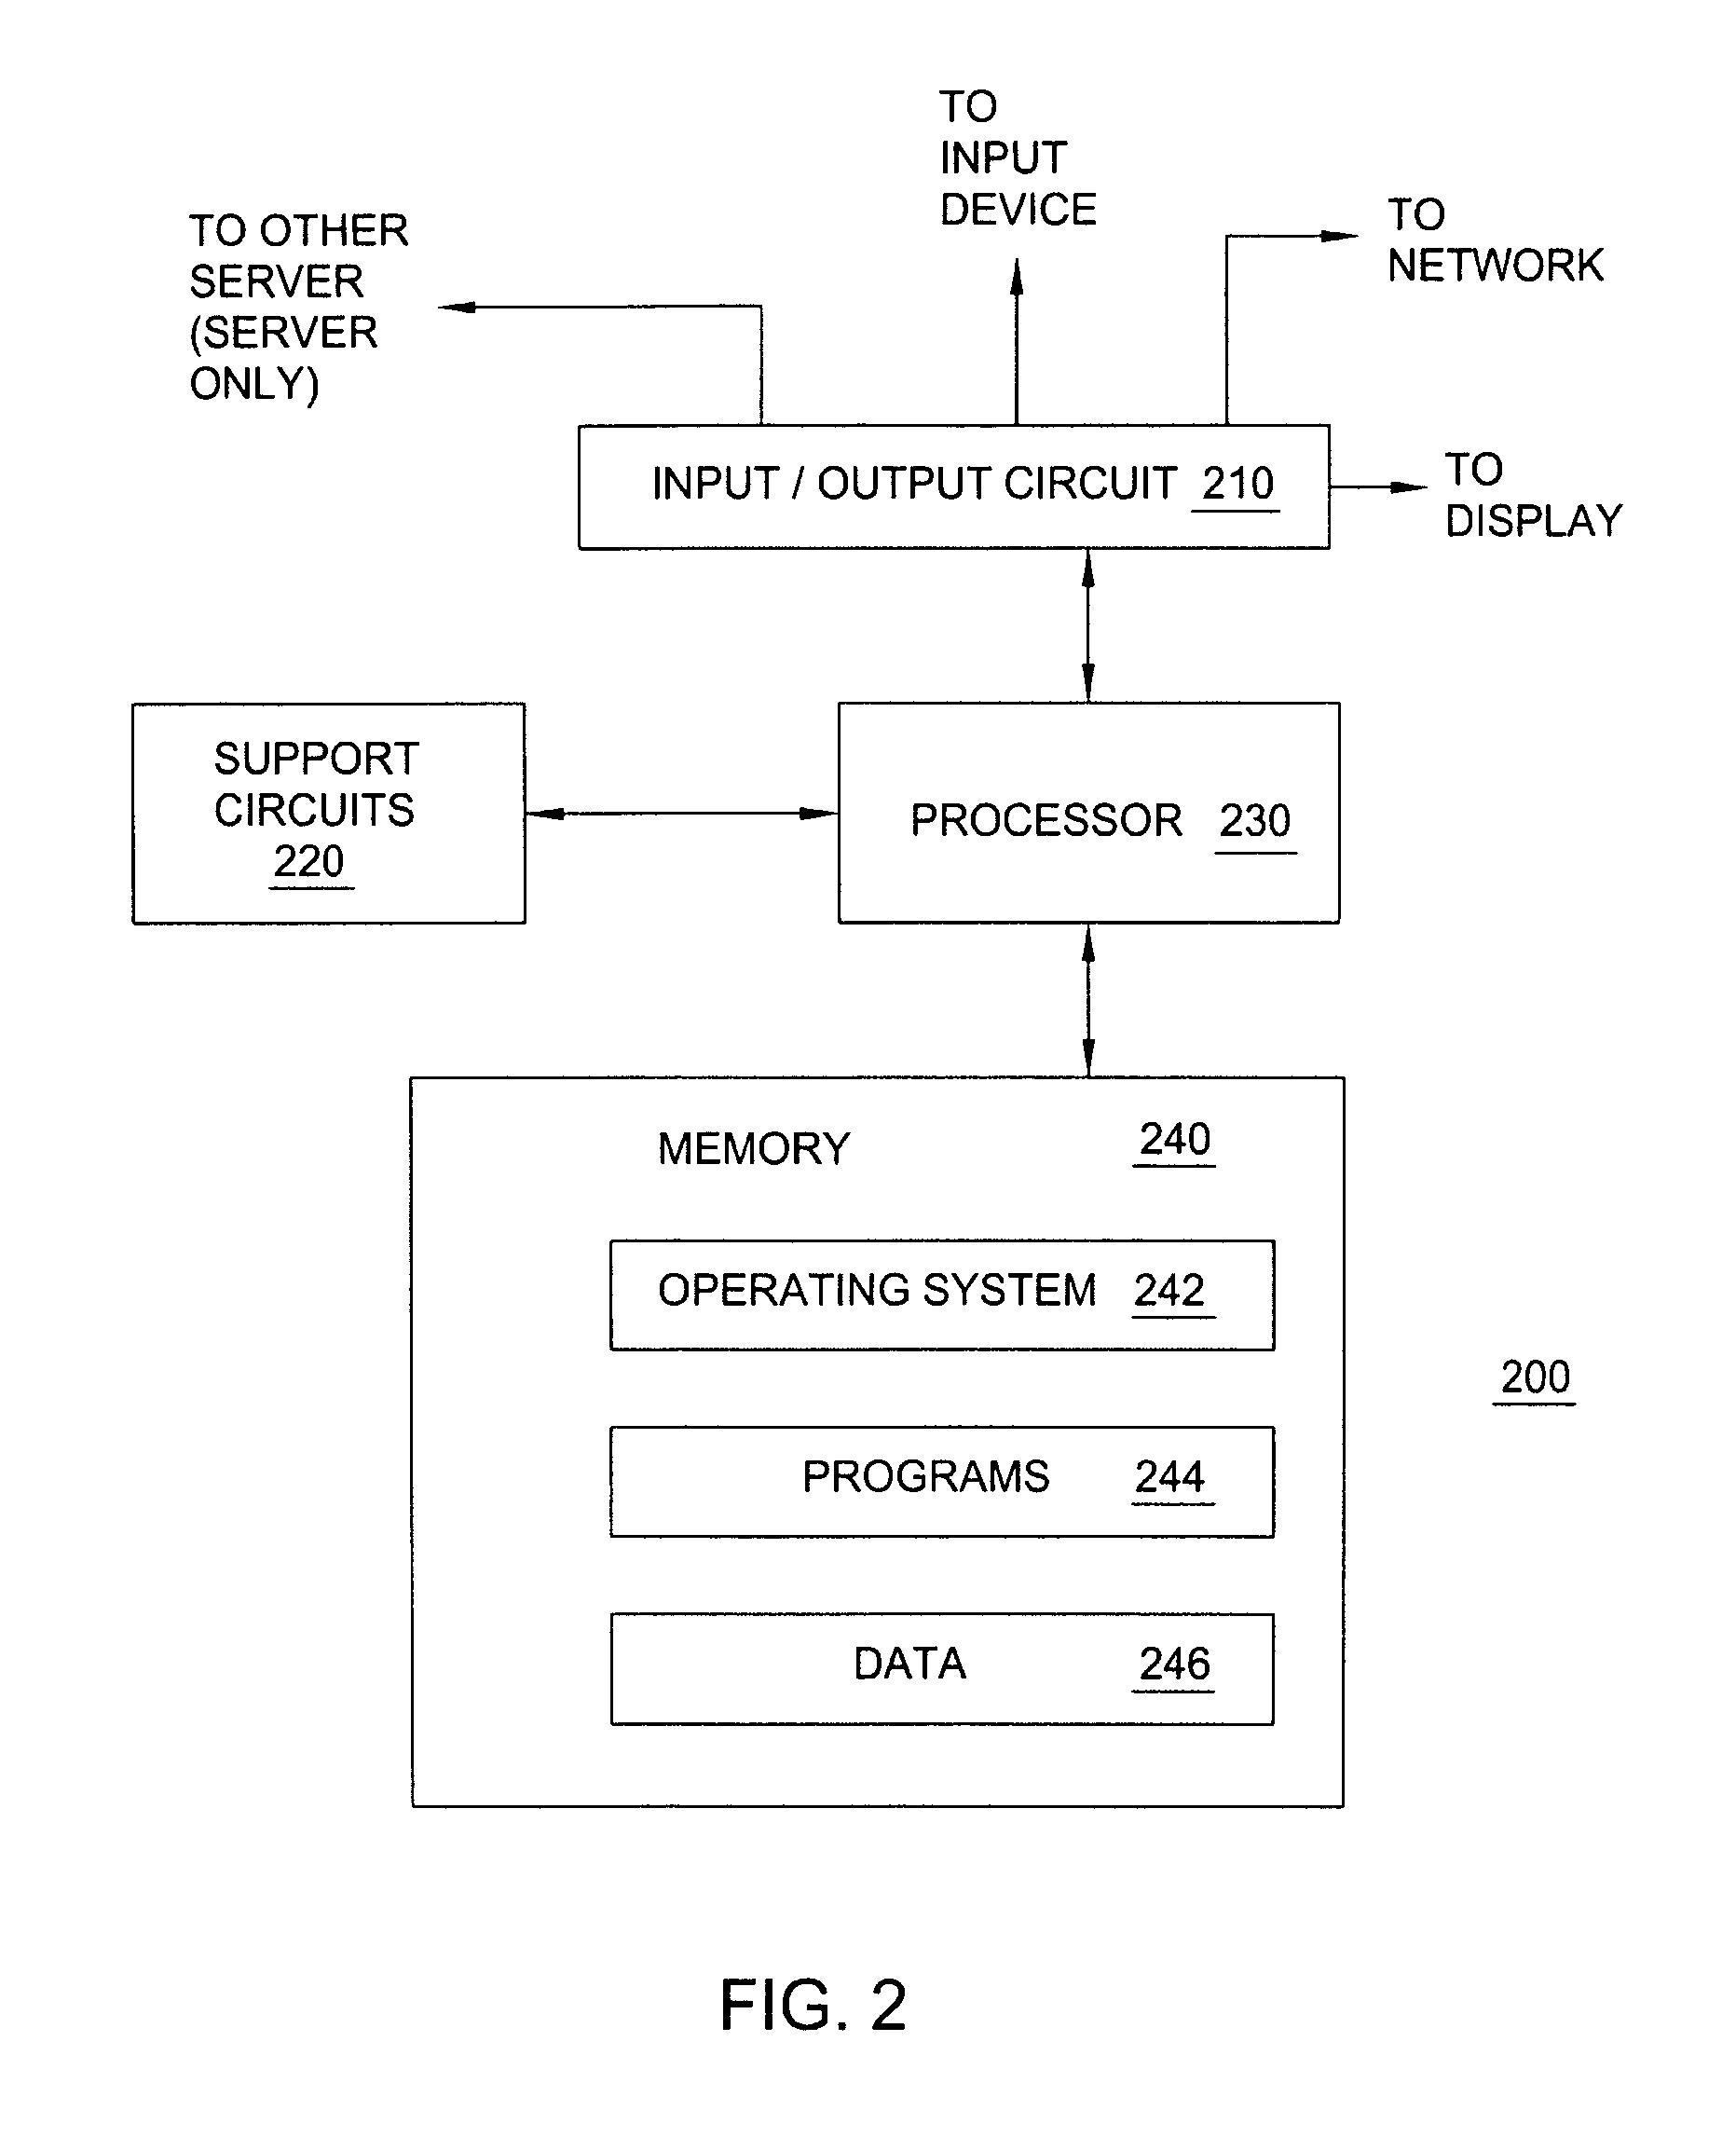 Providing a presentation engine adapted for use by a constrained resource client device